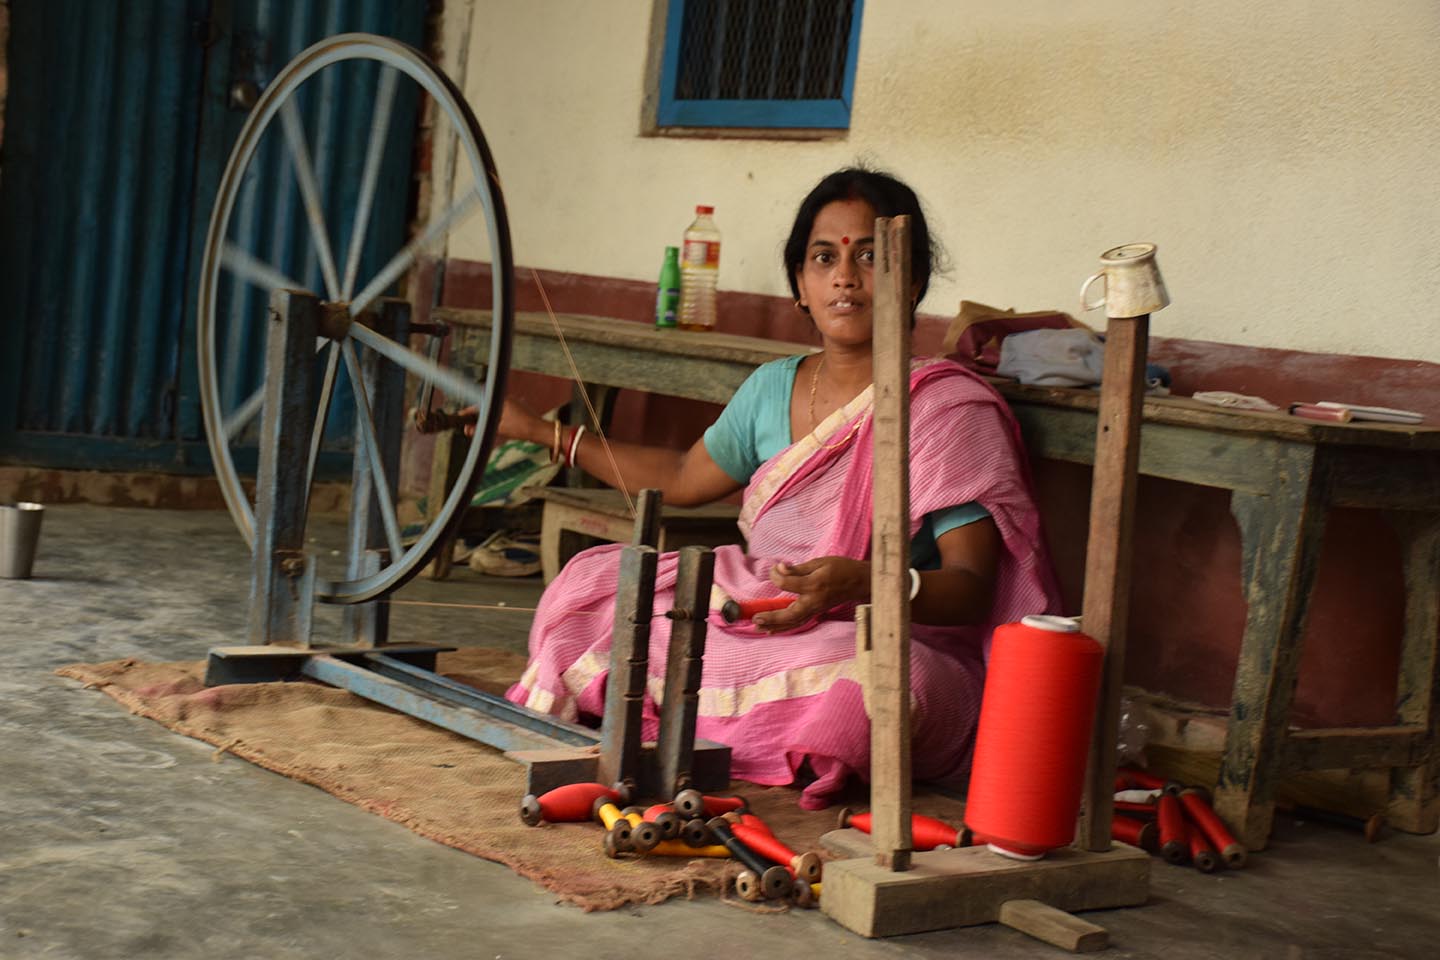 Finding continued joy in India’s handlooms